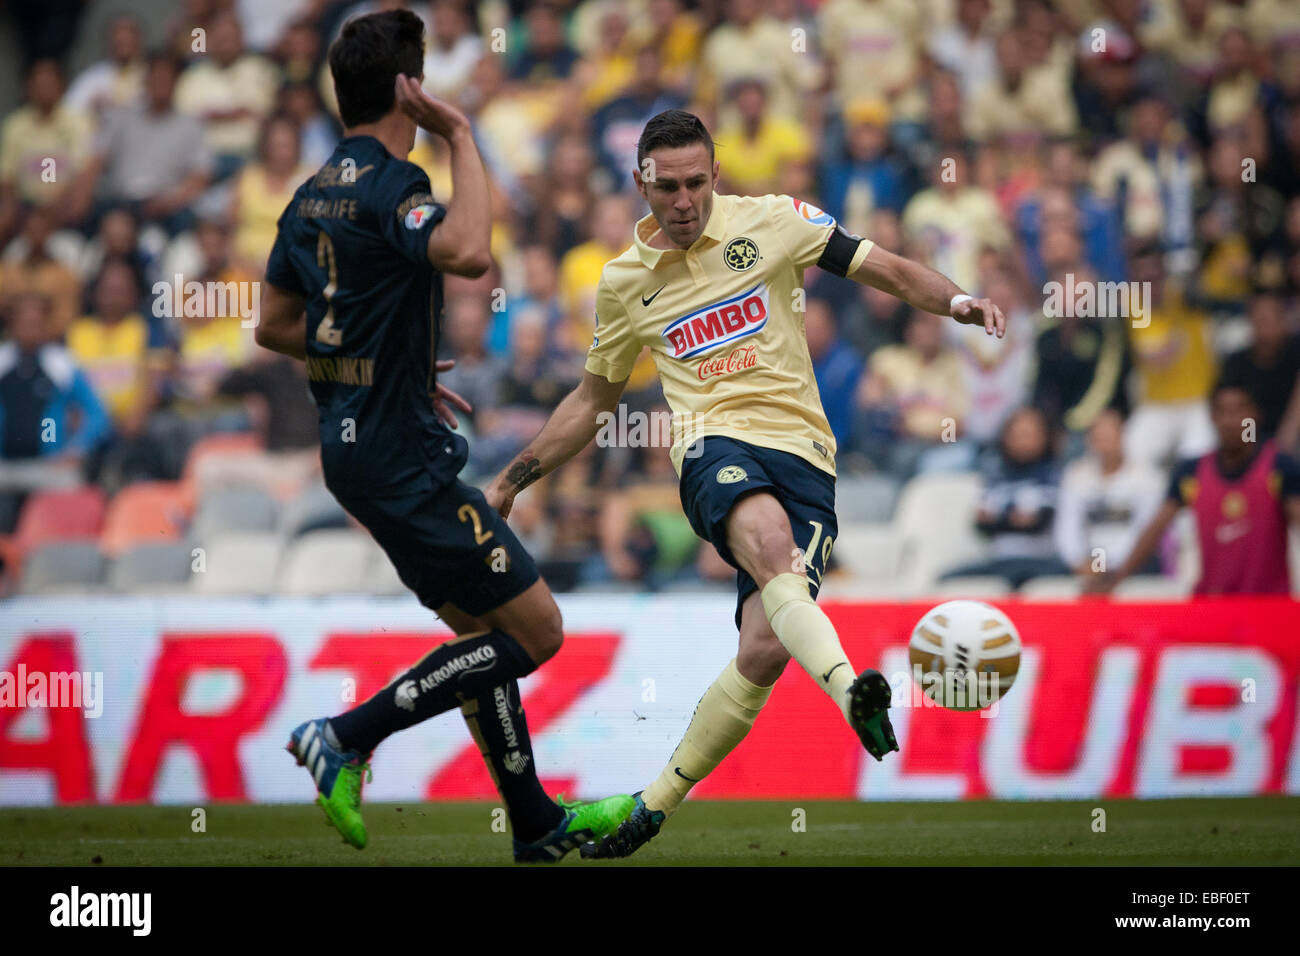 Mexico City, Mexico. 29th Nov, 2014. Miguel Layun (R) of America kicks the ball in front of Josecarlos Van Rankin of UNAM's Pumas during the quarterfinal match of Opening Tournament of the MX League, at Aztec Stadium, in Mexico City, capital of Mexico, on Nov. 29, 2014. © Pedro Mera/Xinhua/Alamy Live News Stock Photo